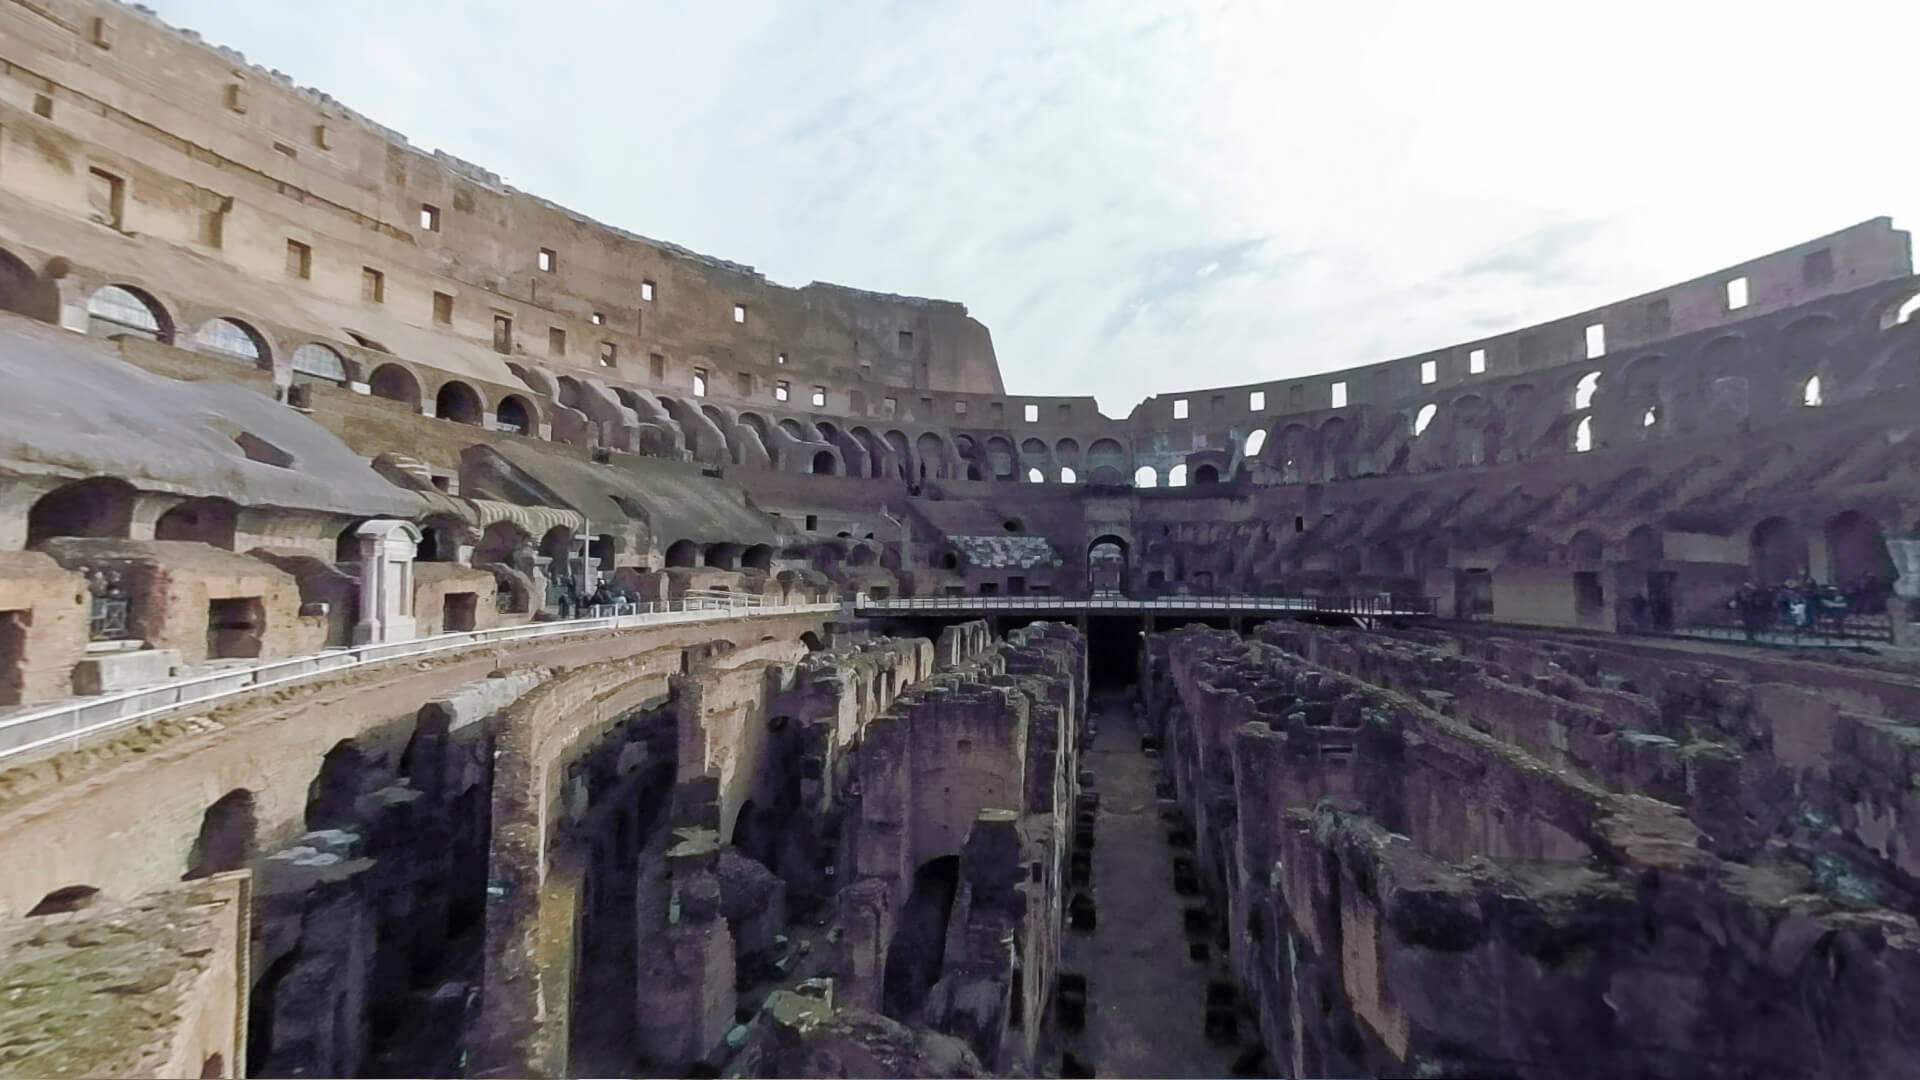 Visual representation via video tours and 3D models is the Colosseum in Rome.